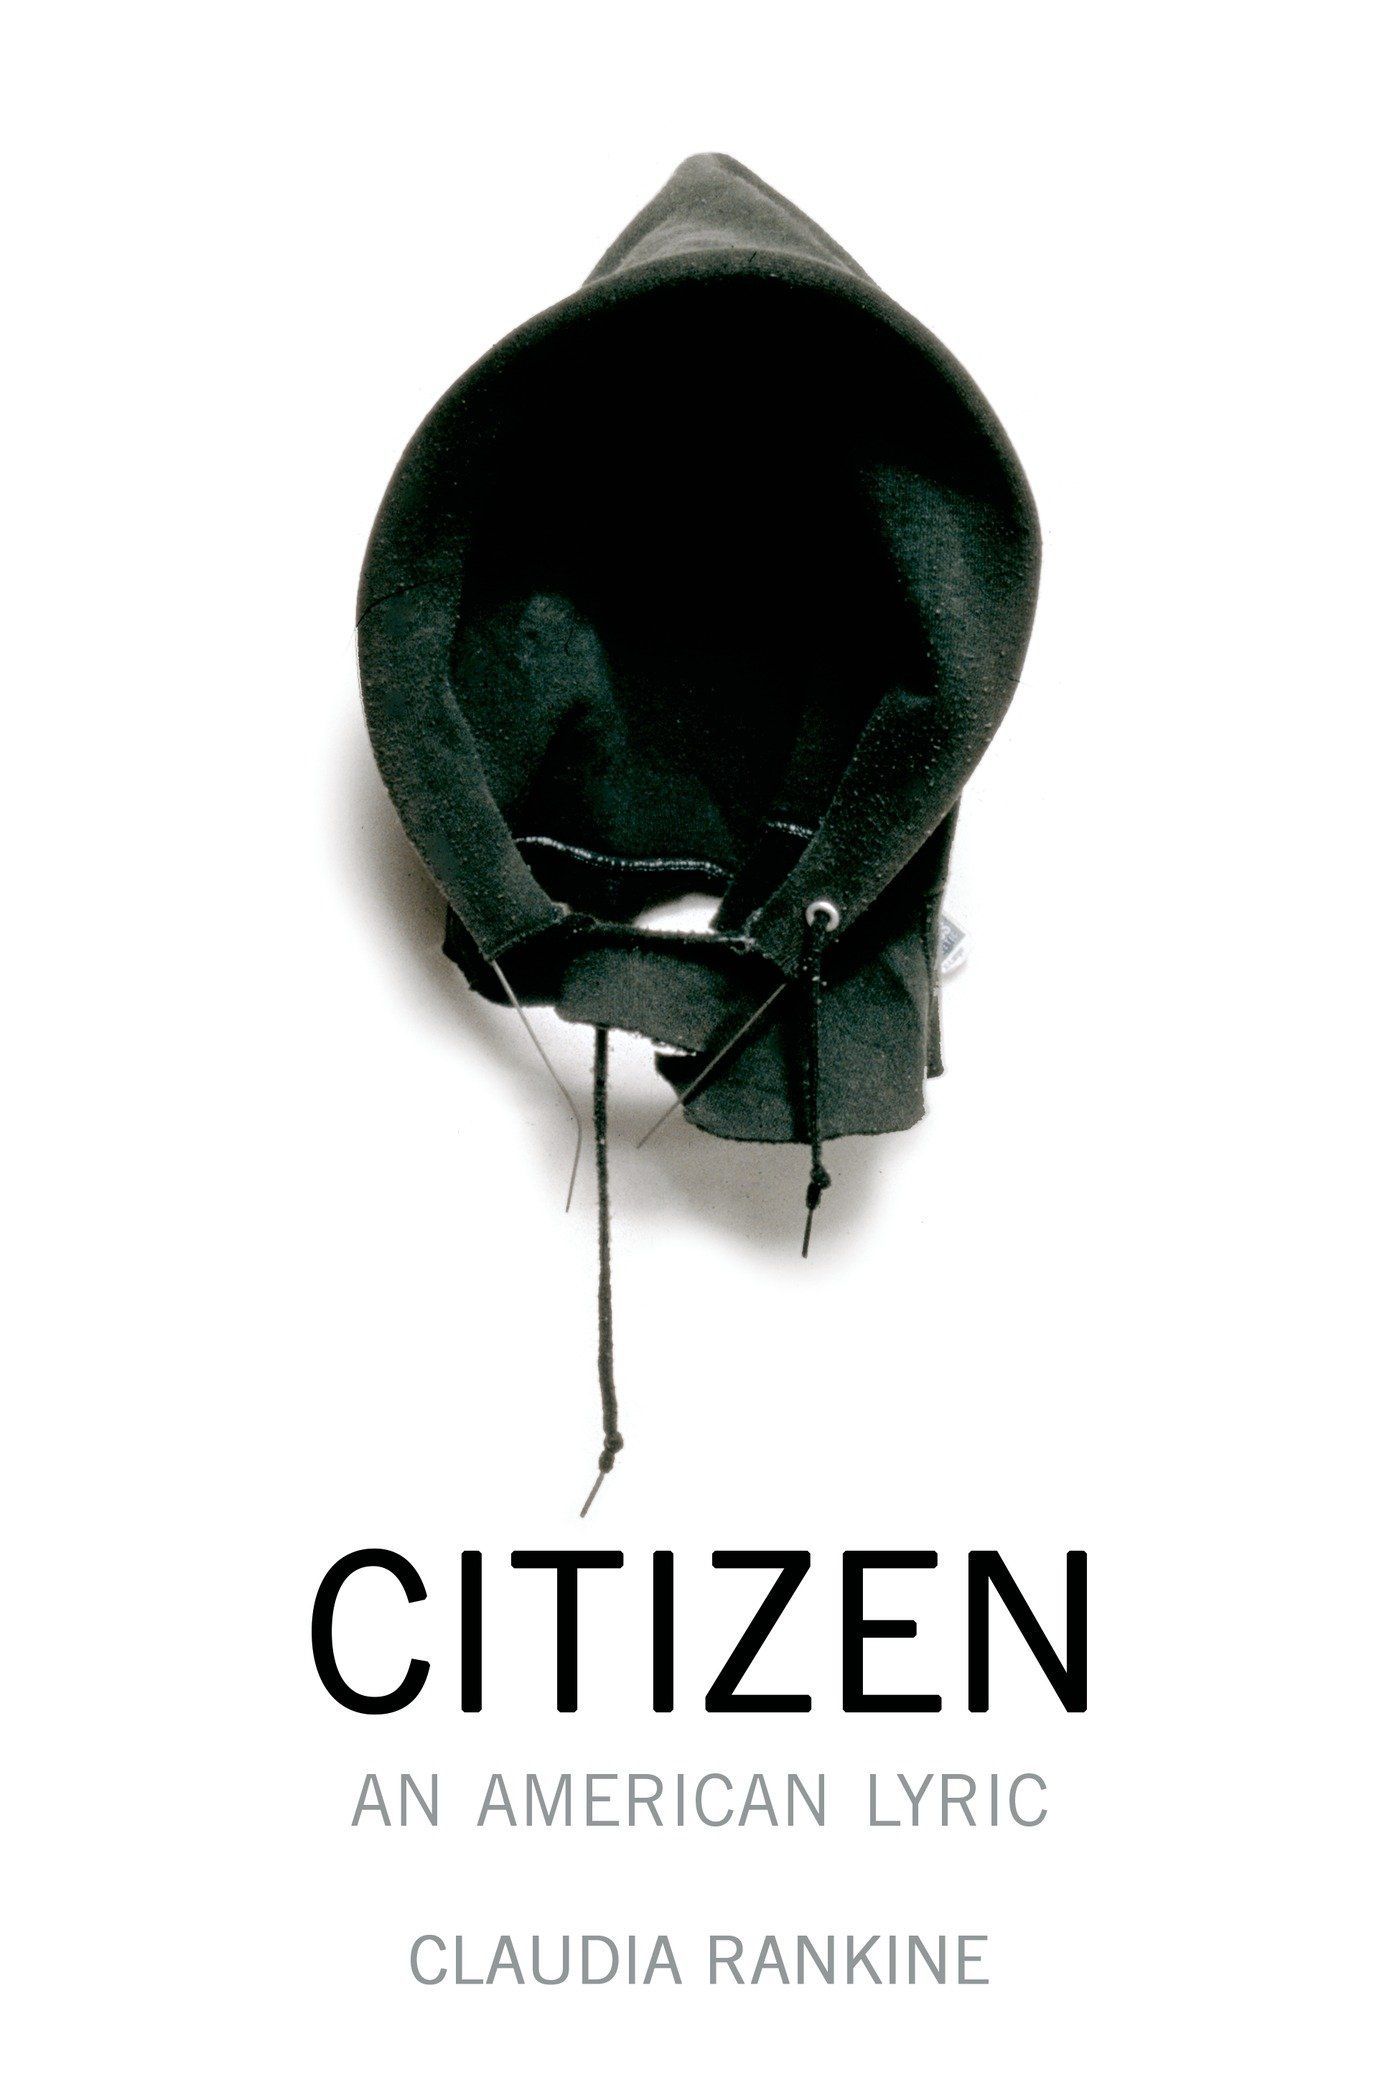 Roundtable on “Citizen: An American Lyric,” Part I